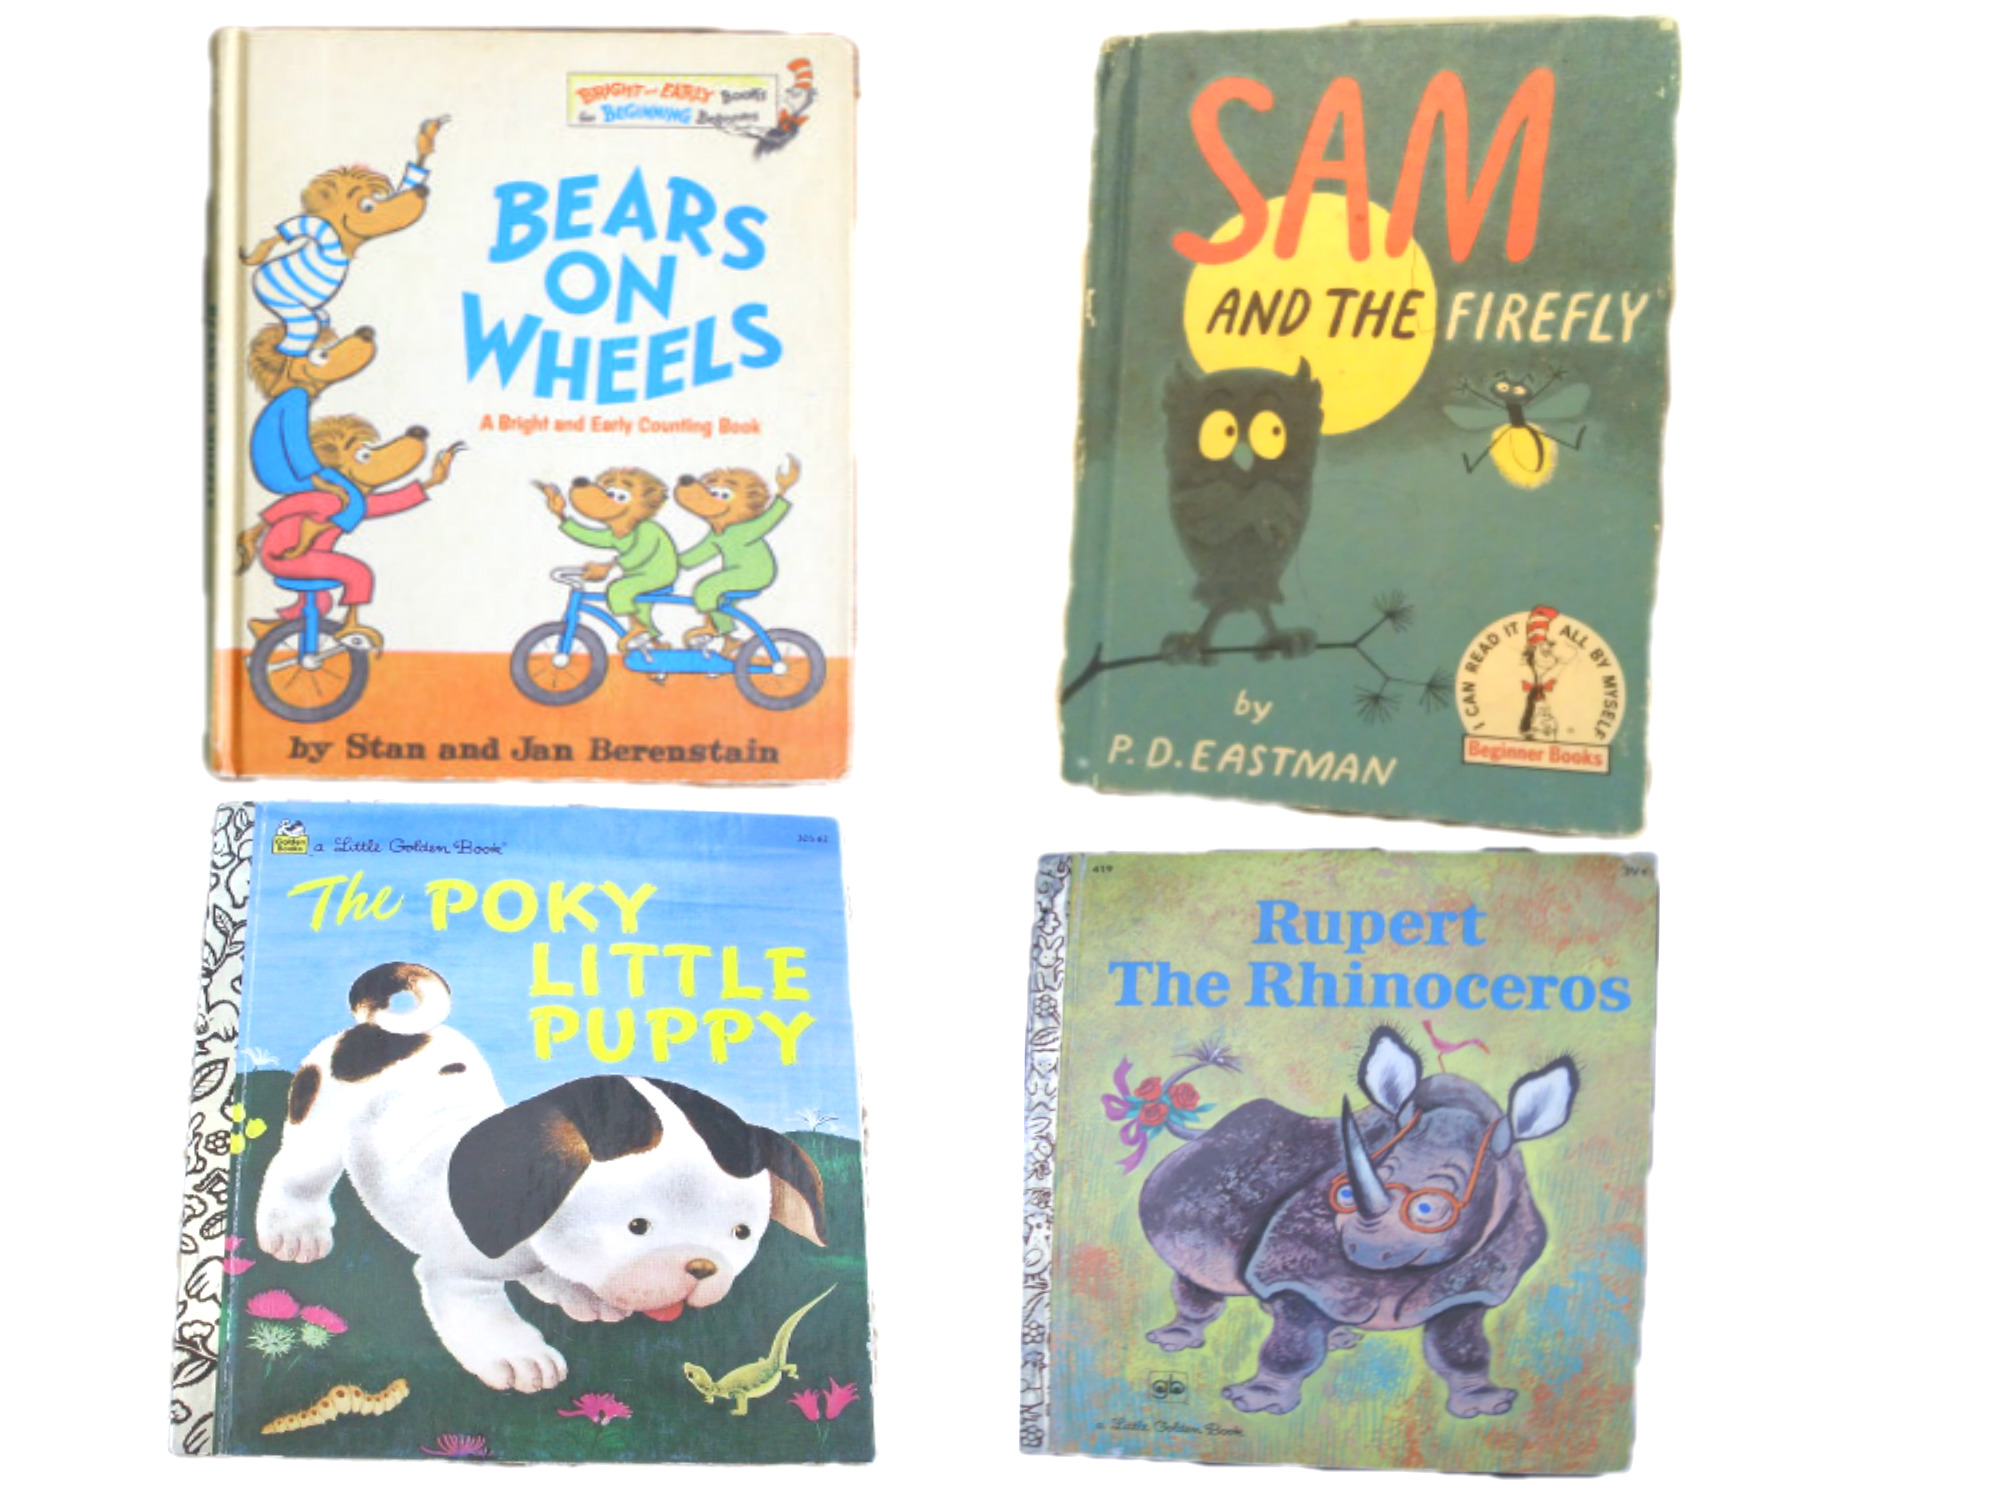 4 children's book sets - purchased free (Bears on Wheels, Sam and the Firefly and 2 ...